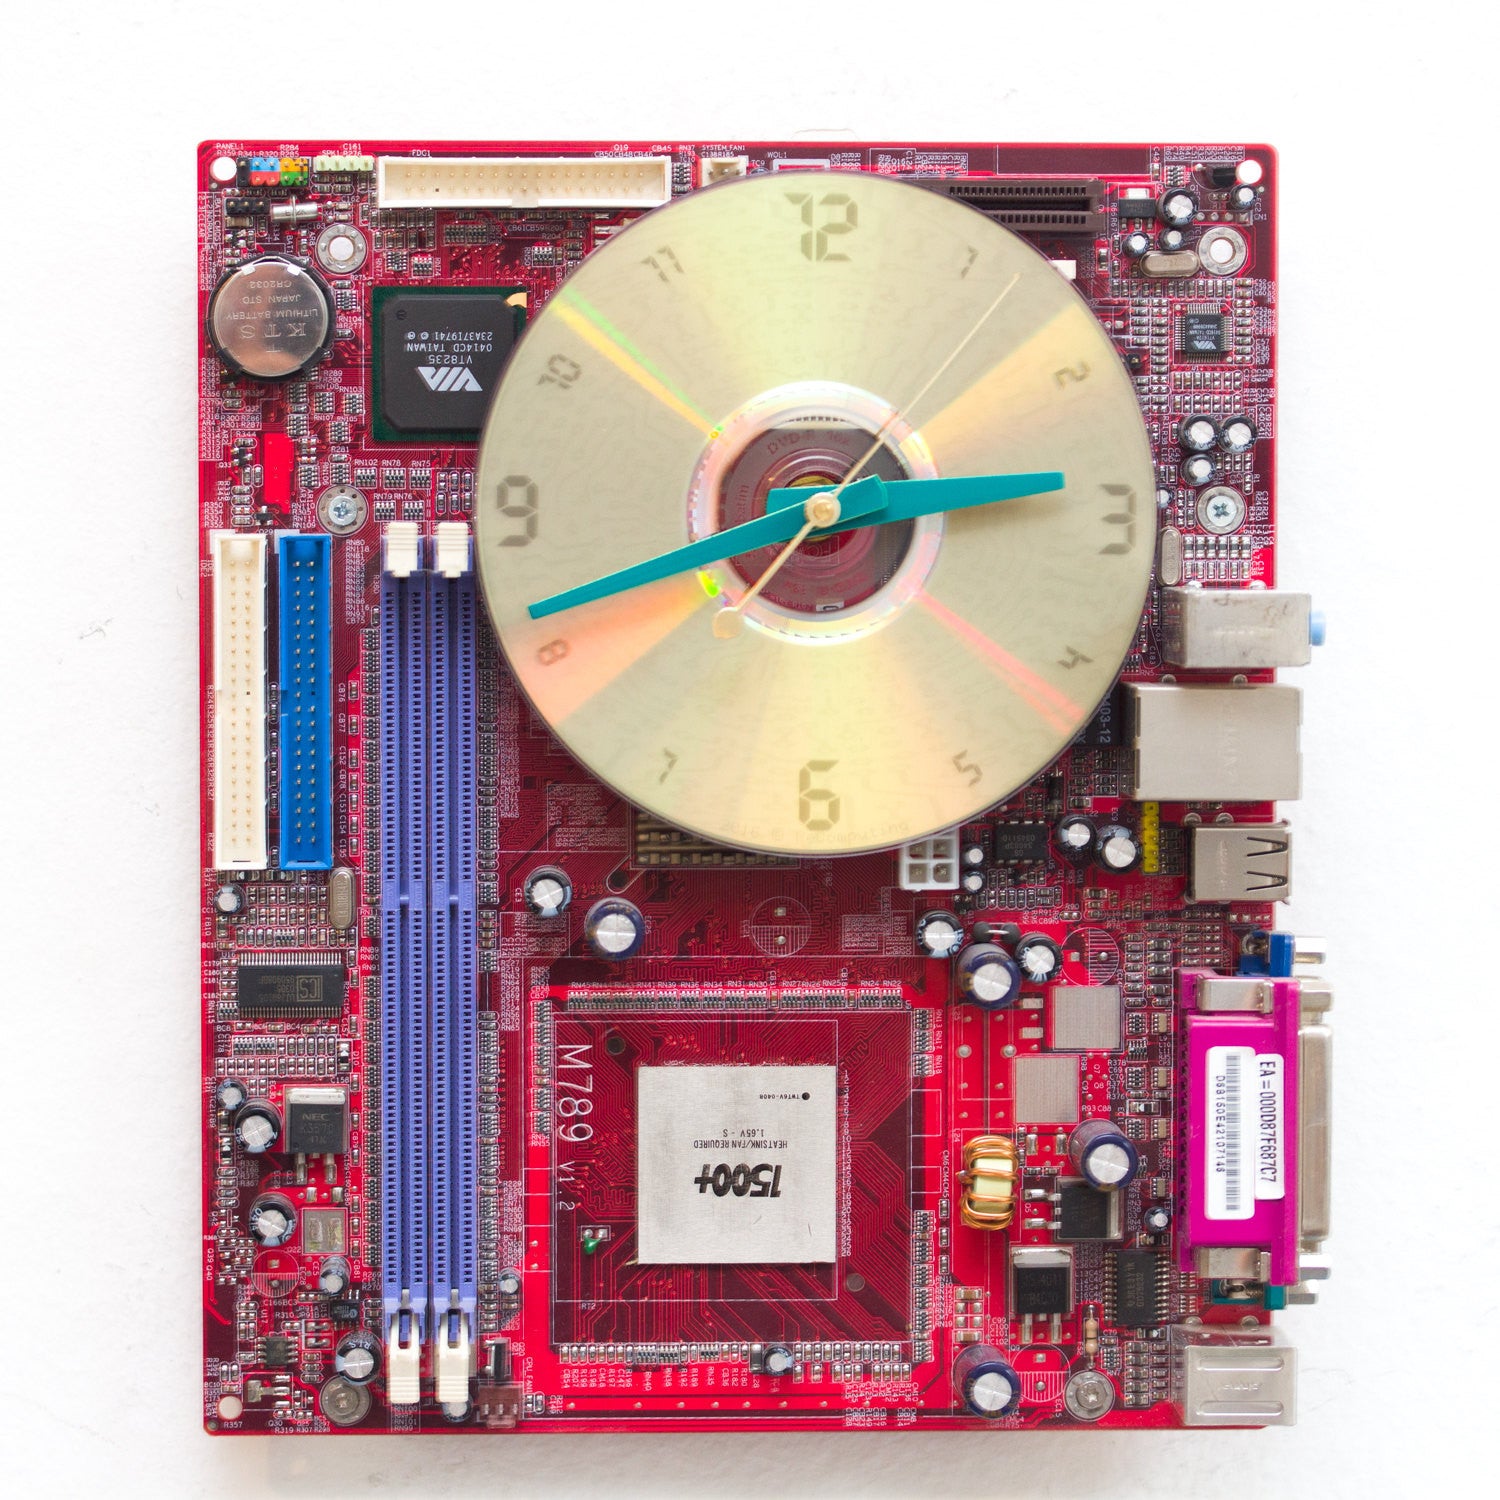 Wall Clock made of red Circuit Board